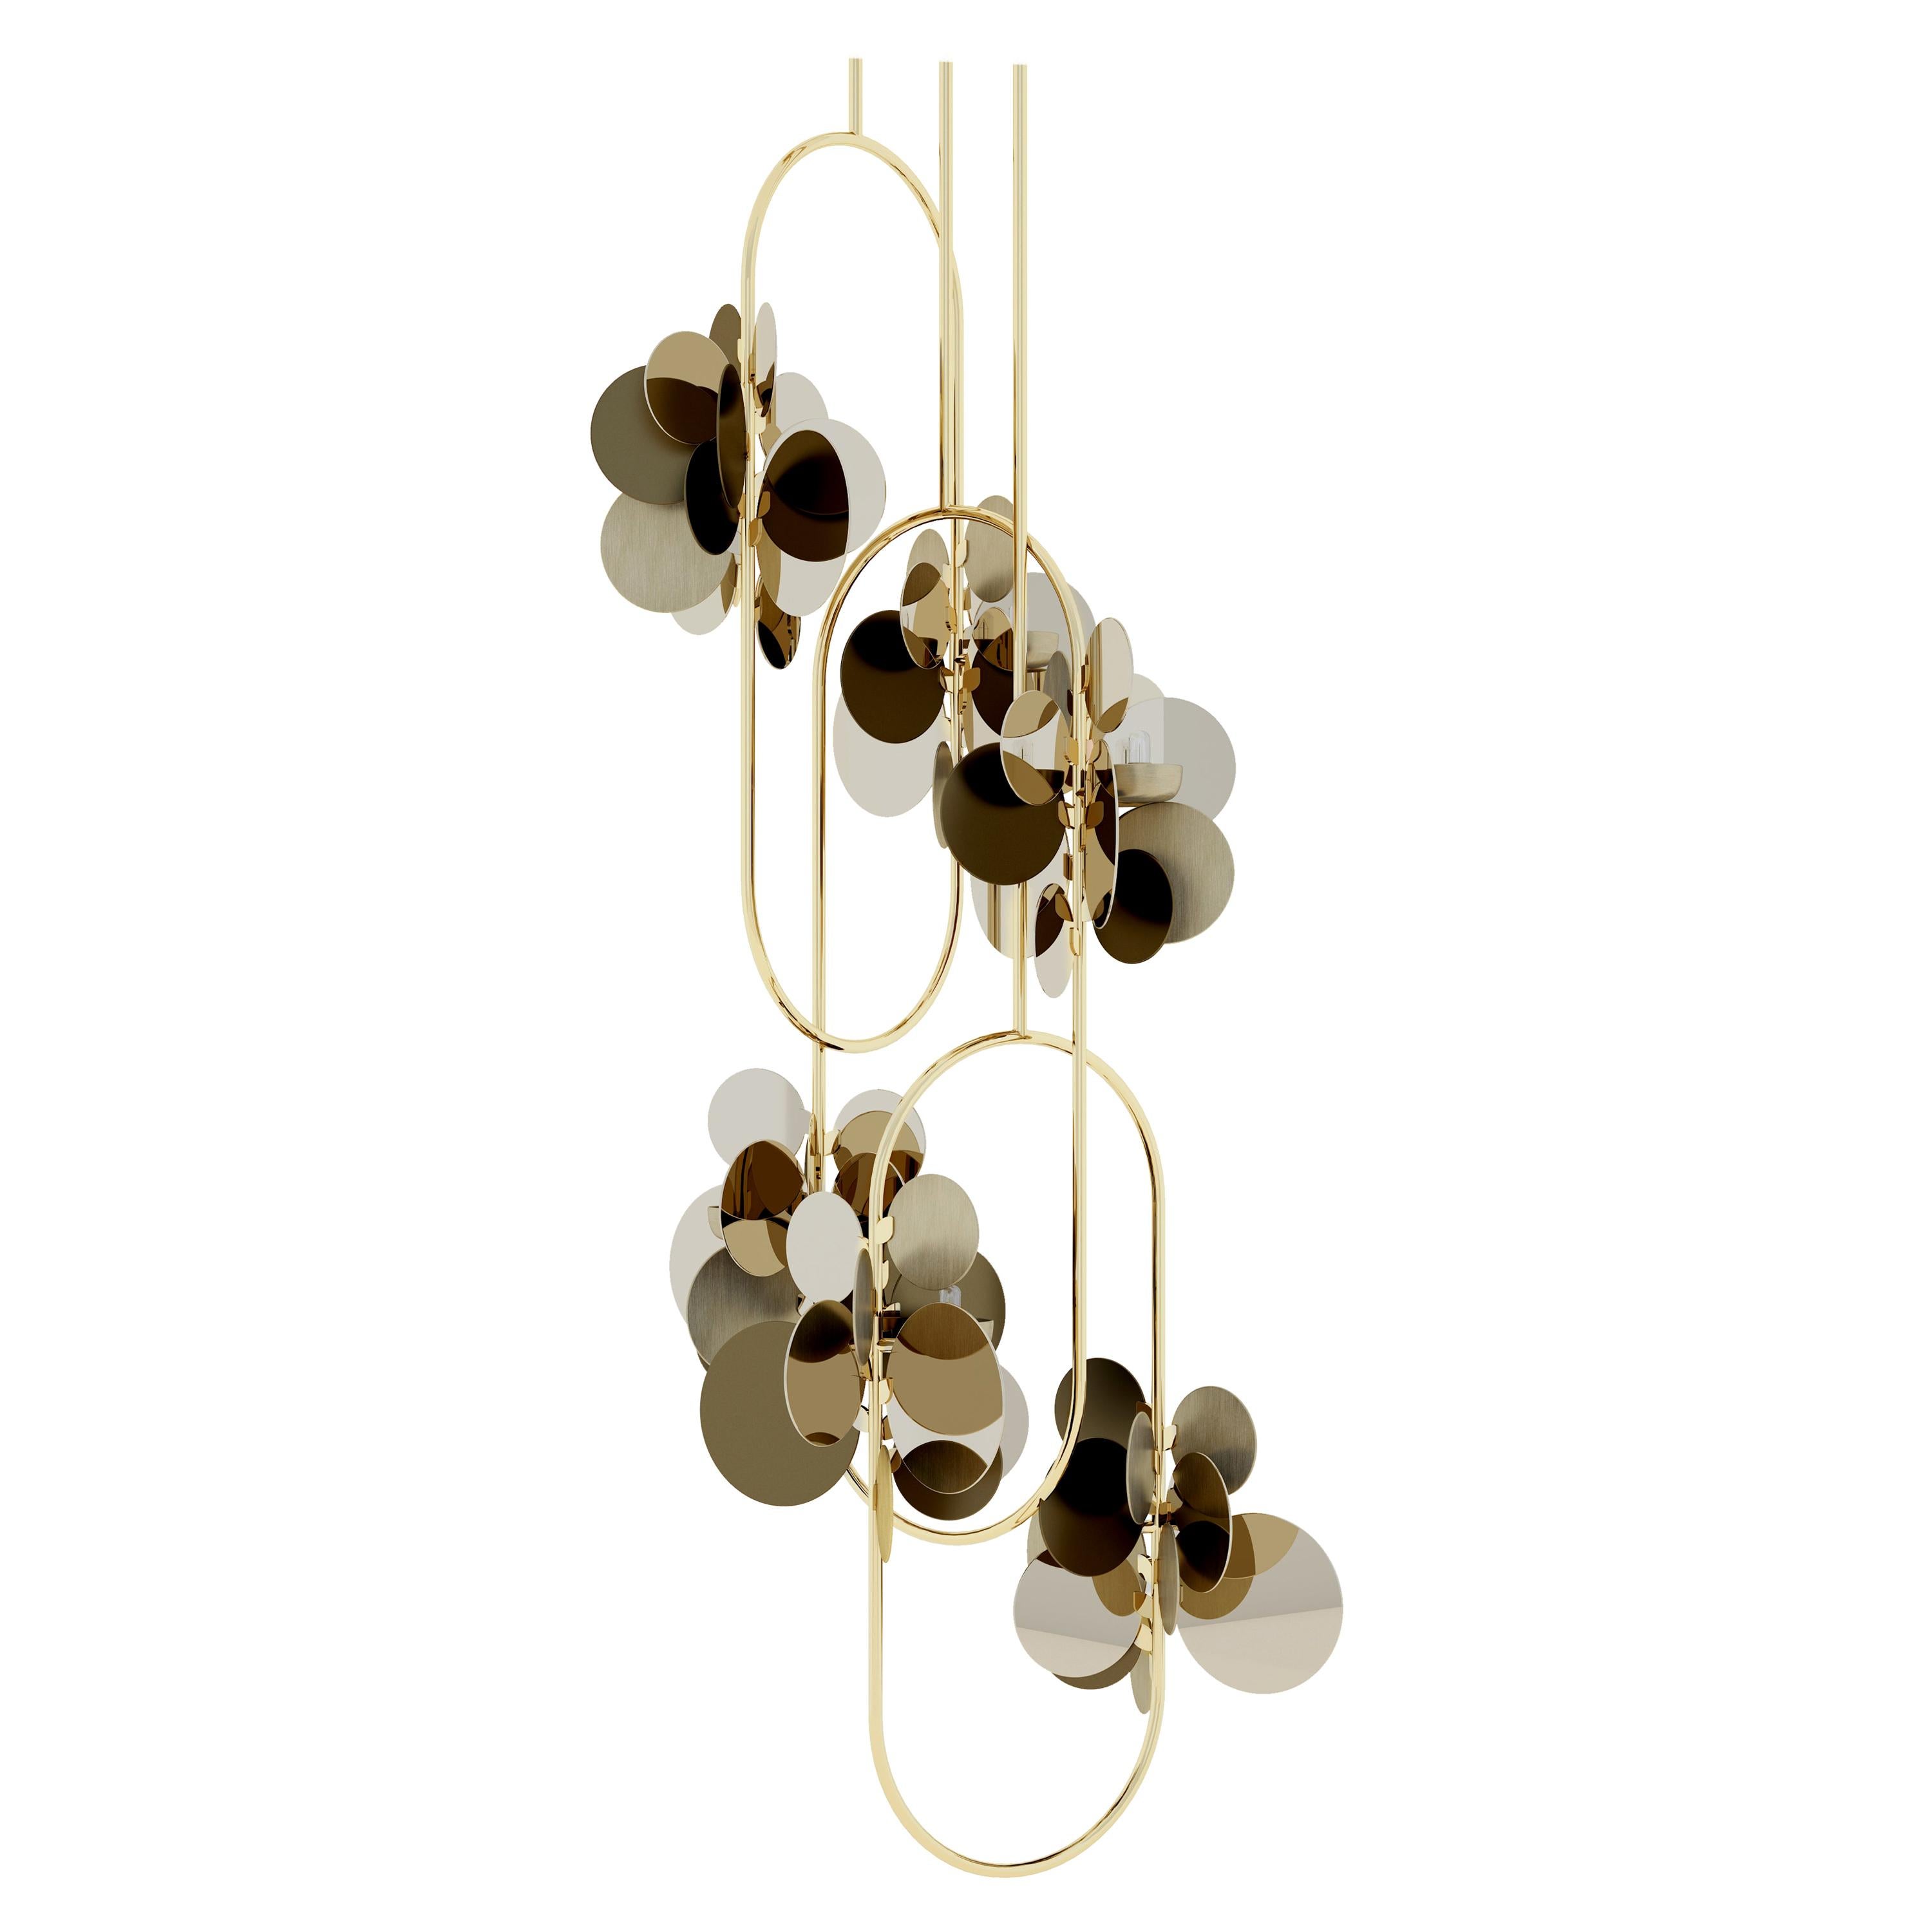 21st Century Polished Brass Hera Suspension Lamp by Creativemary